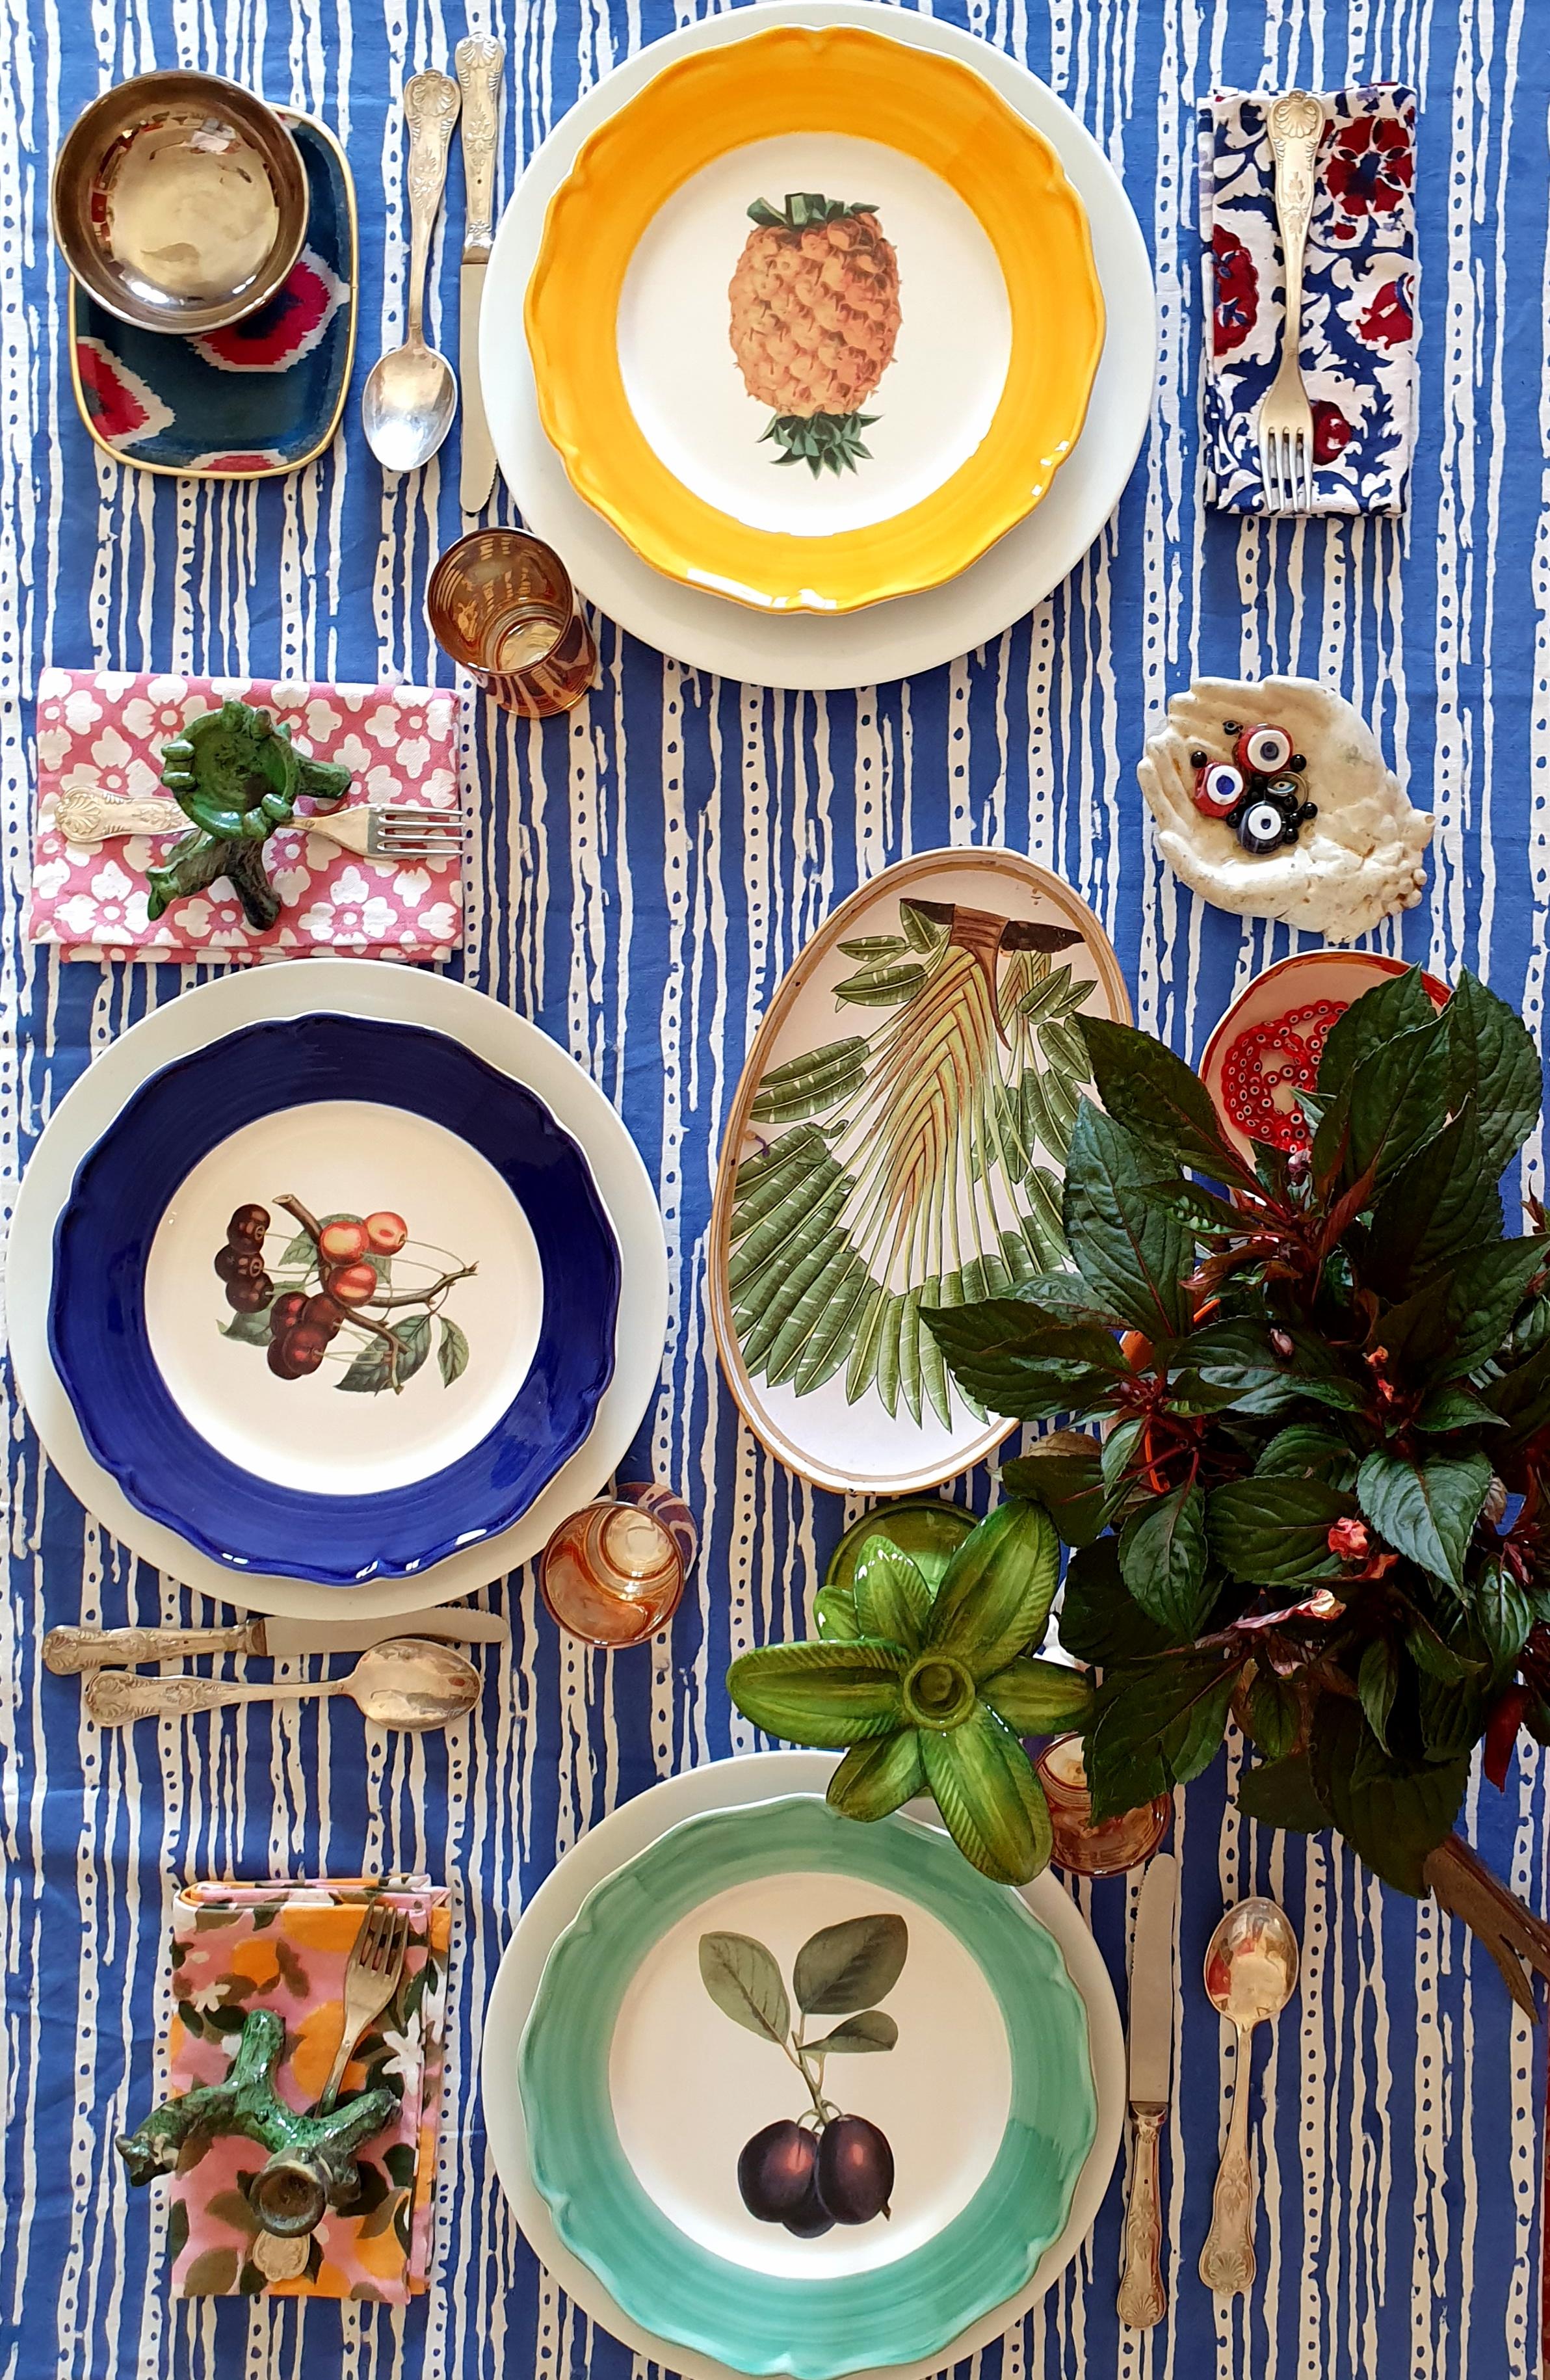 hand painted plates made in italy